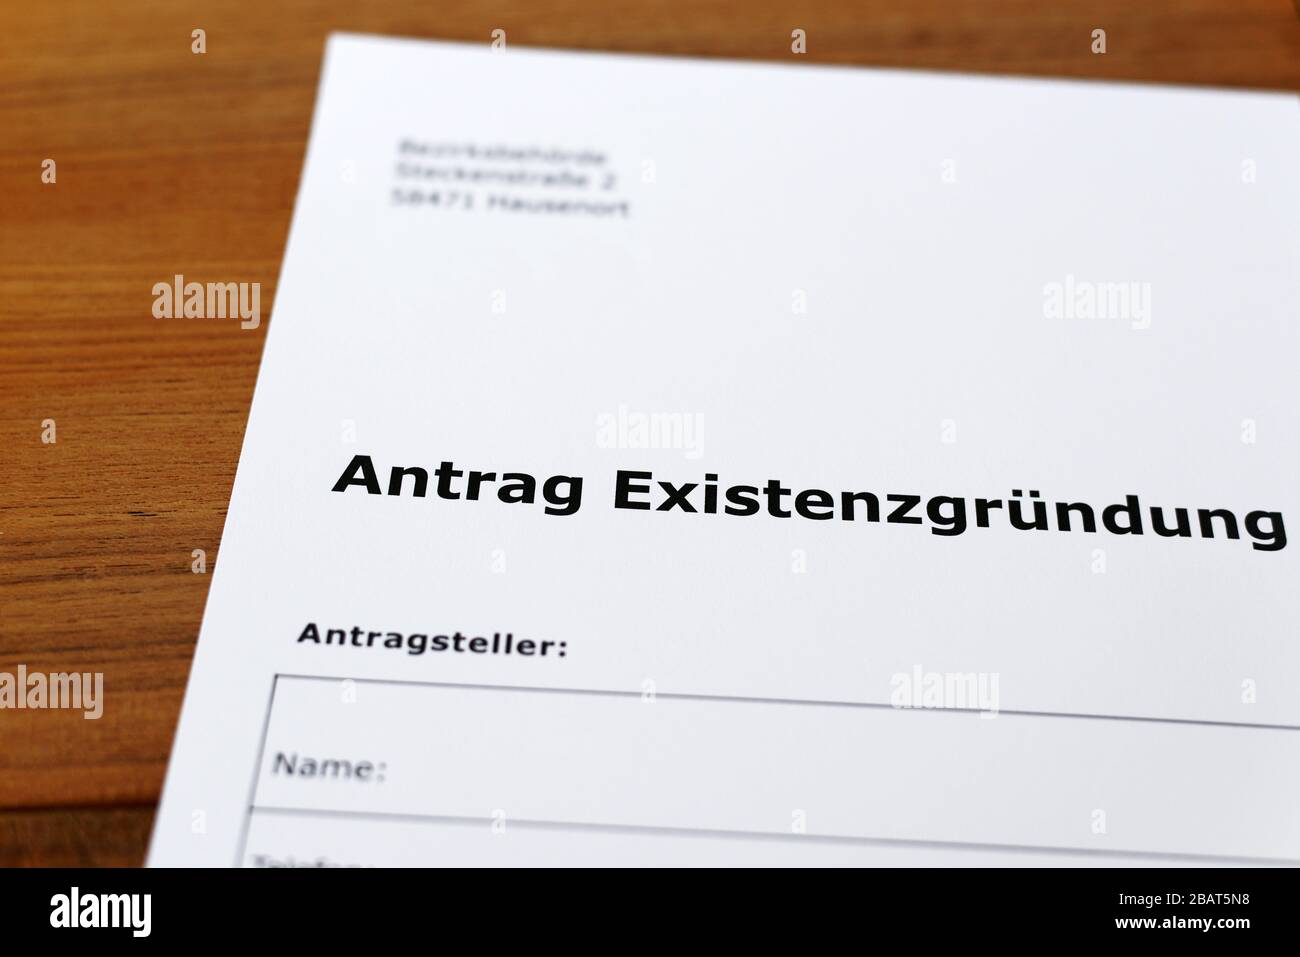 A sheet of paper with the german words 'Antrag Existentgründung' - Translation in englisch: Application for a start-up grant. Stock Photo